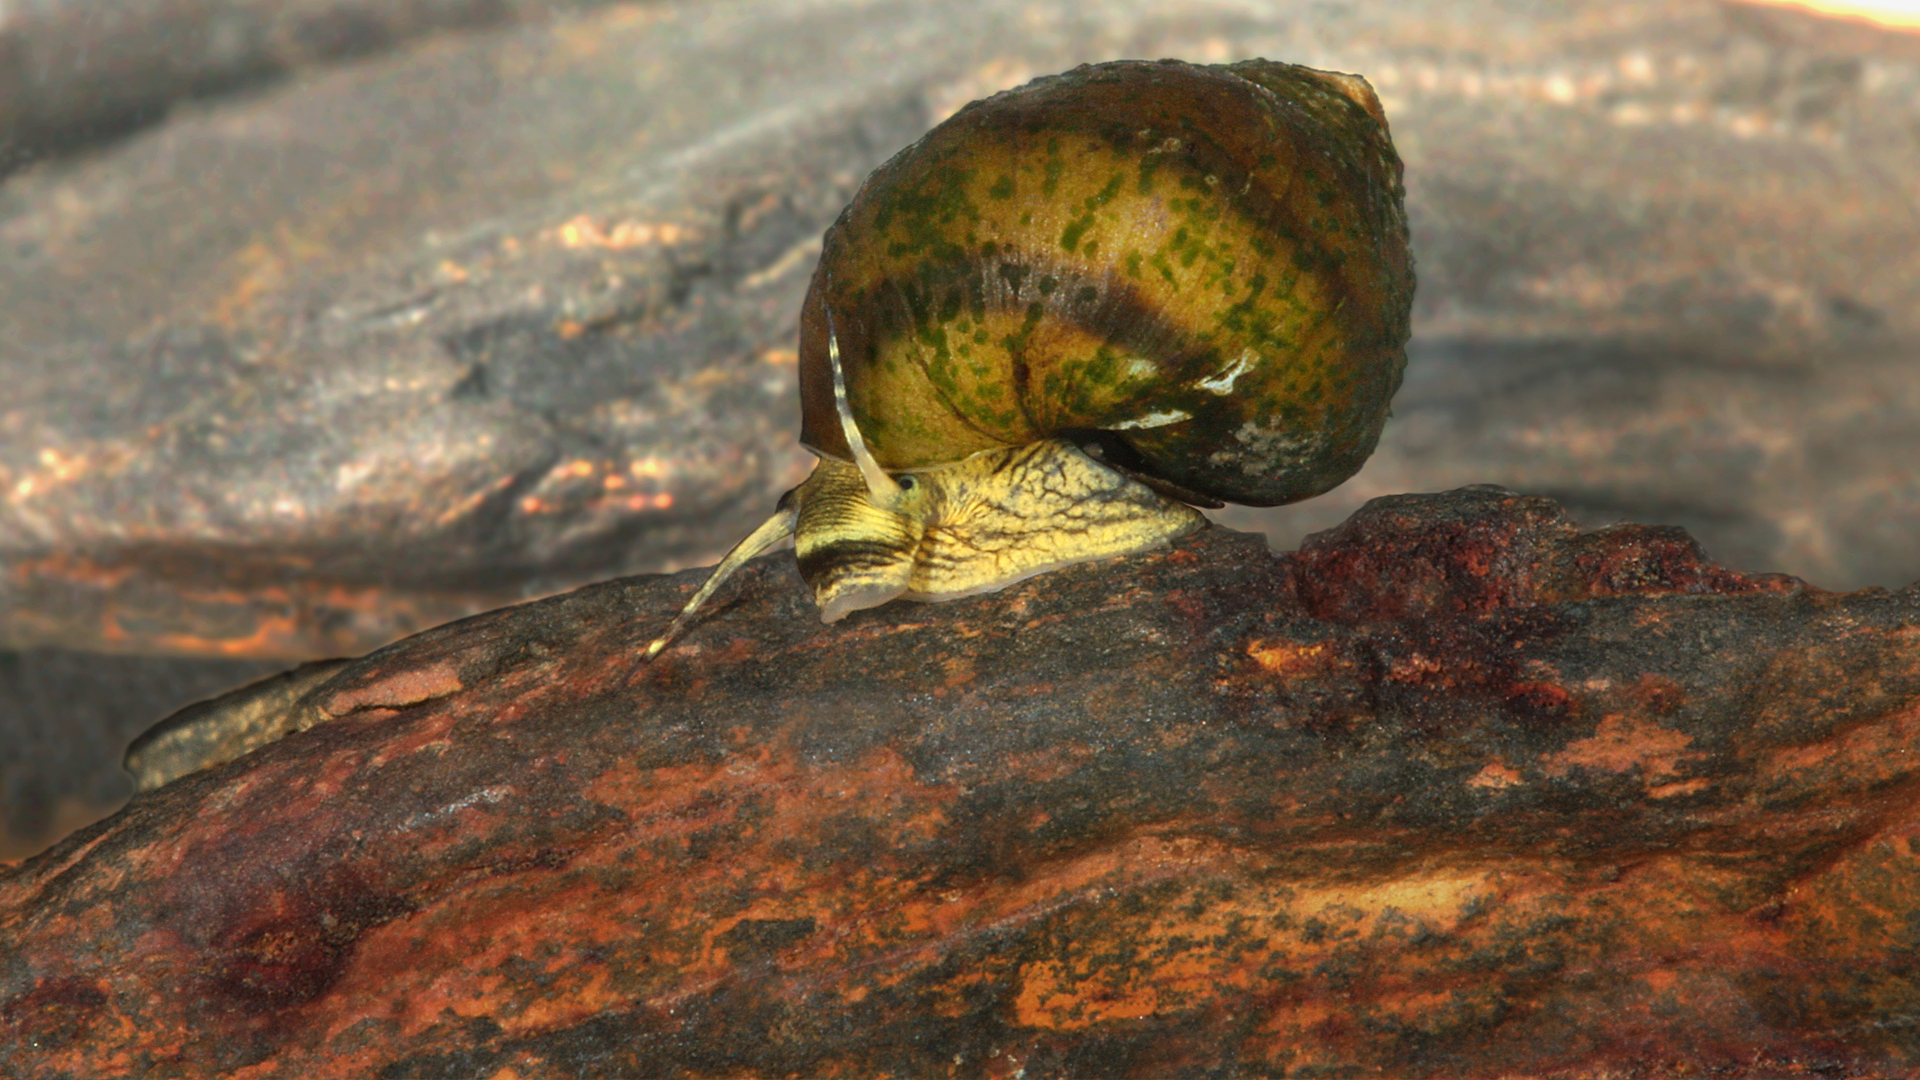 The Unlikely Tale of a Tenacious Snail - Science Friday